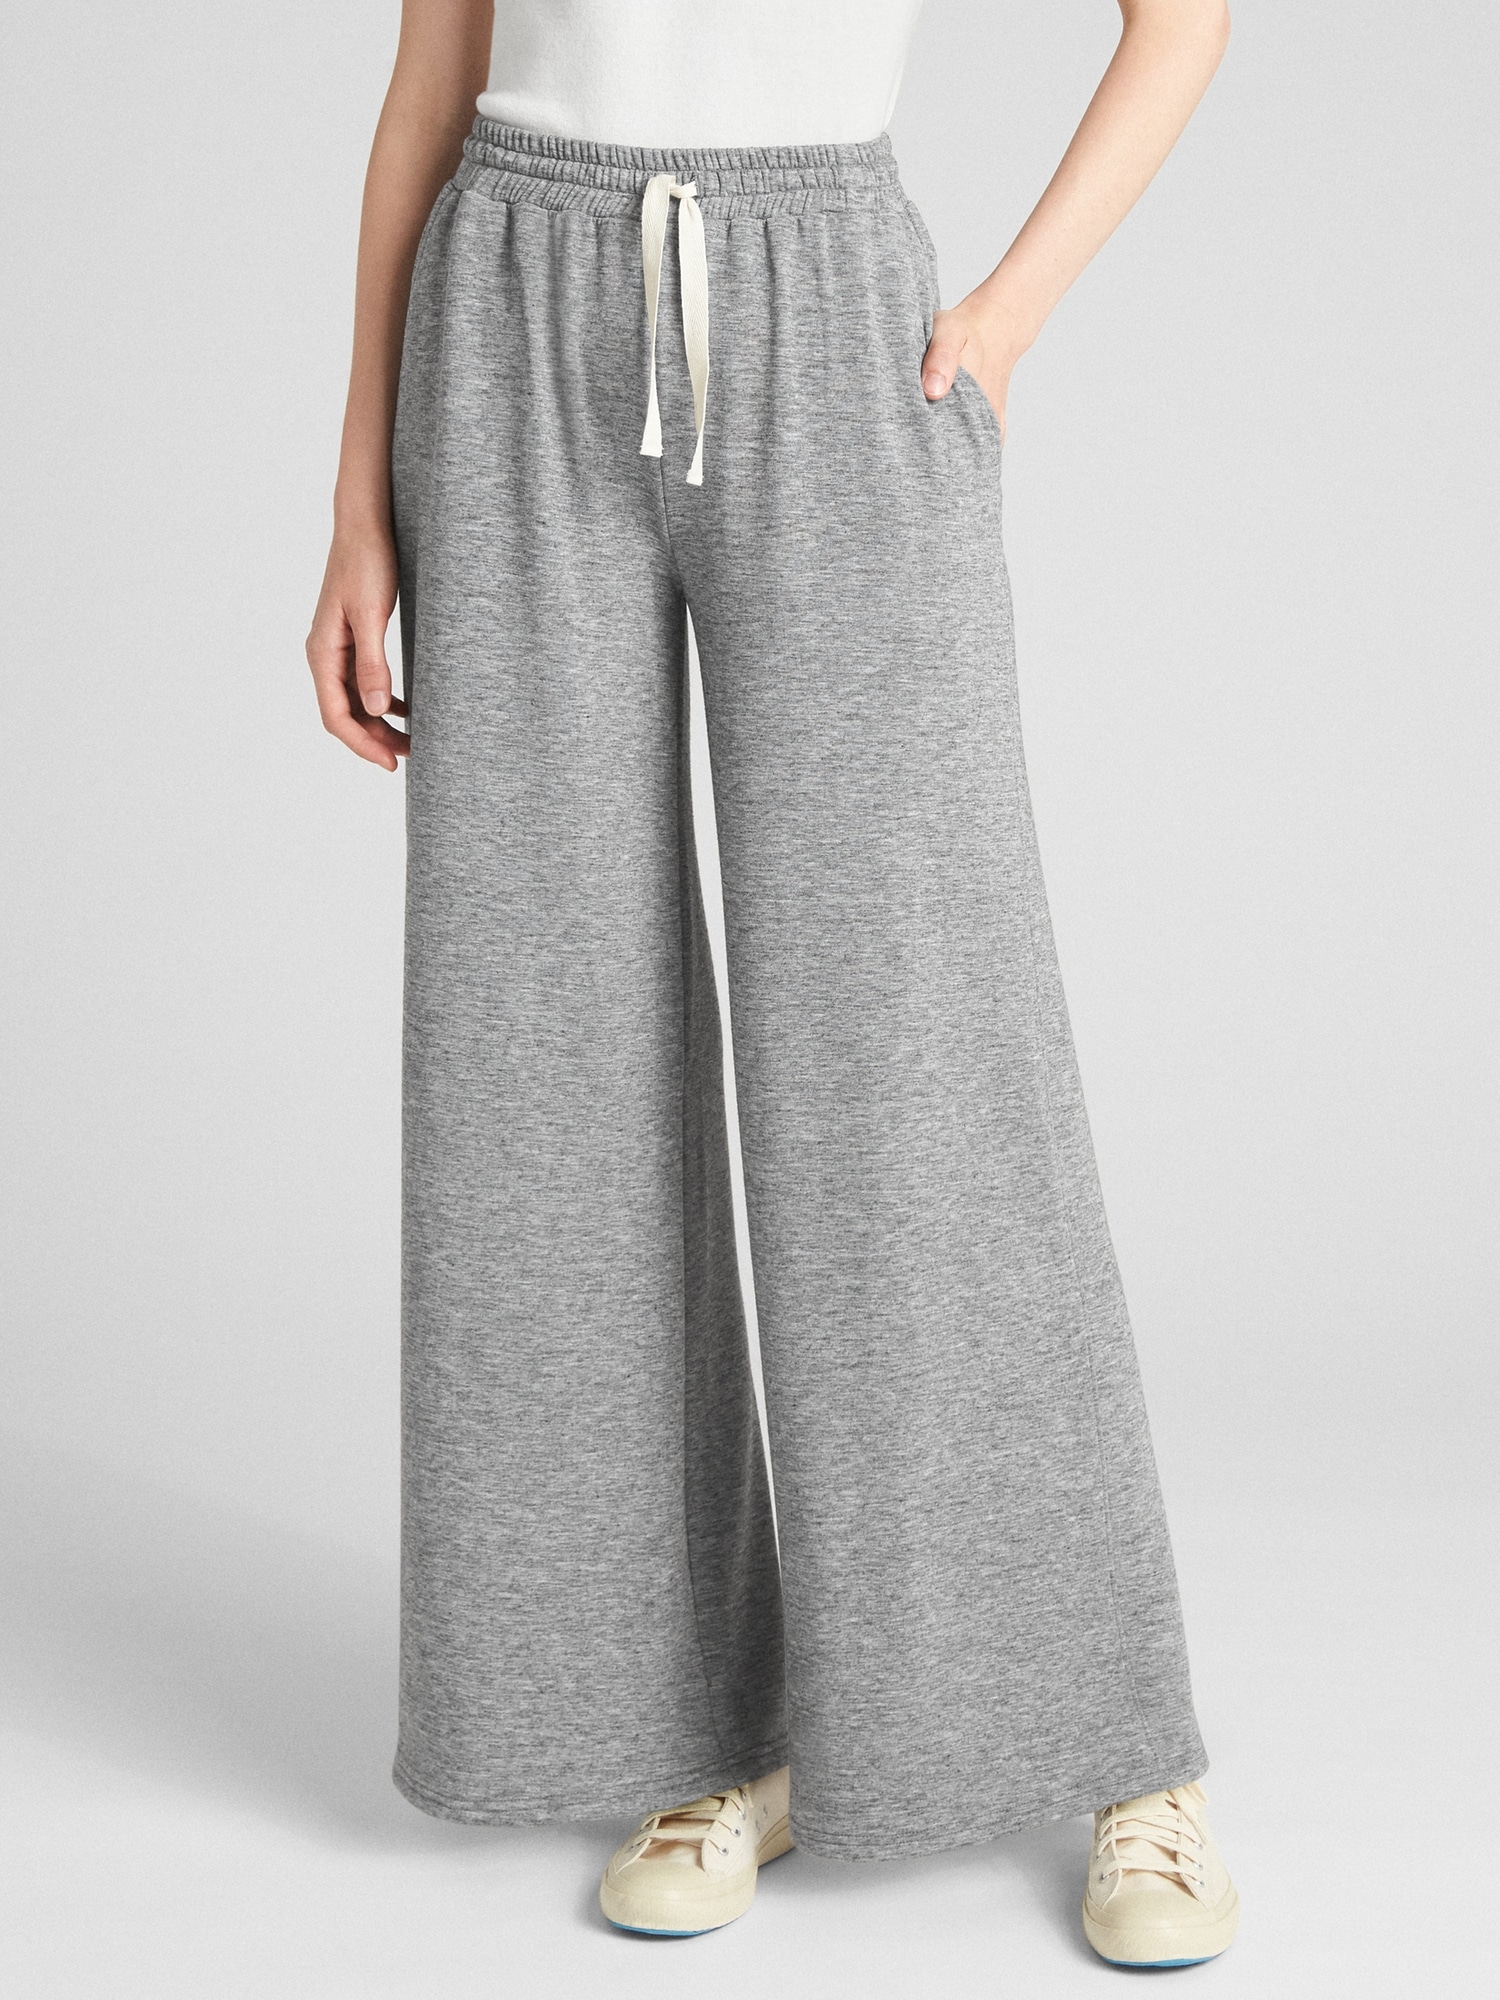 Women's Wide Leg Drawstring Lounge Pants • Size: S/M (Sizes 2-8) •  Approximately 41 in Length • 29 Inseam • 100% Polyester • Drawstring  high-rise waistband • Two pockets for keeping your